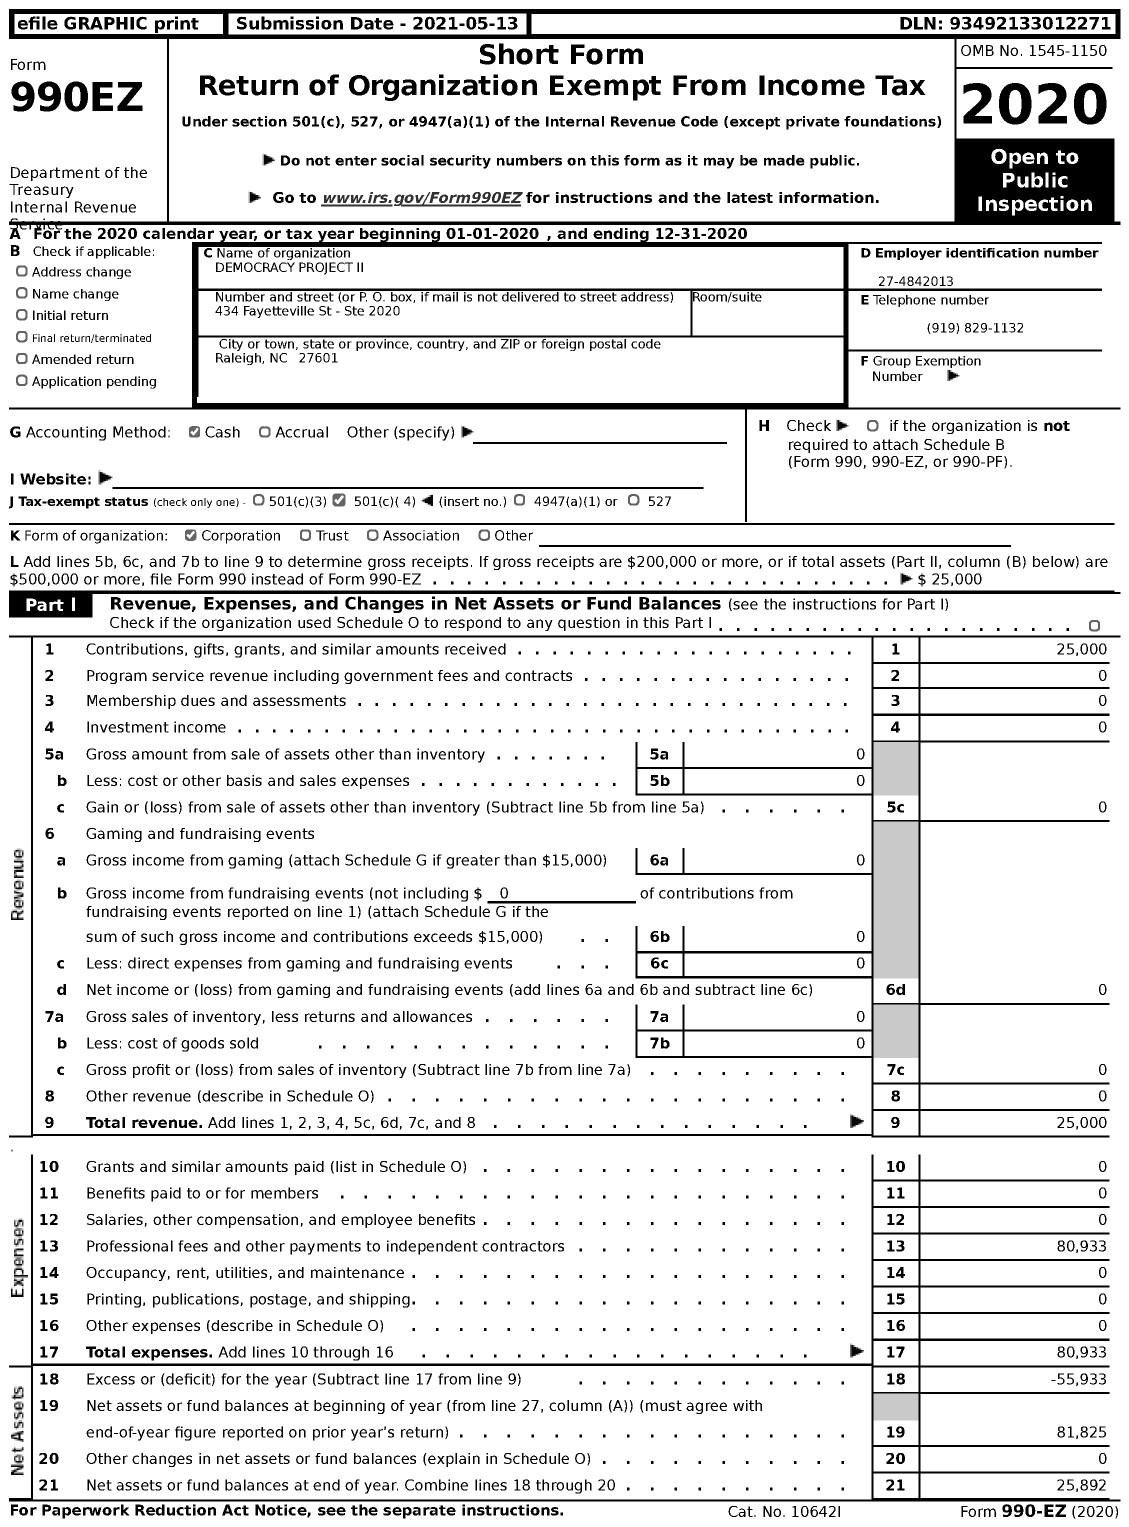 Image of first page of 2020 Form 990EZ for Democracy Project II